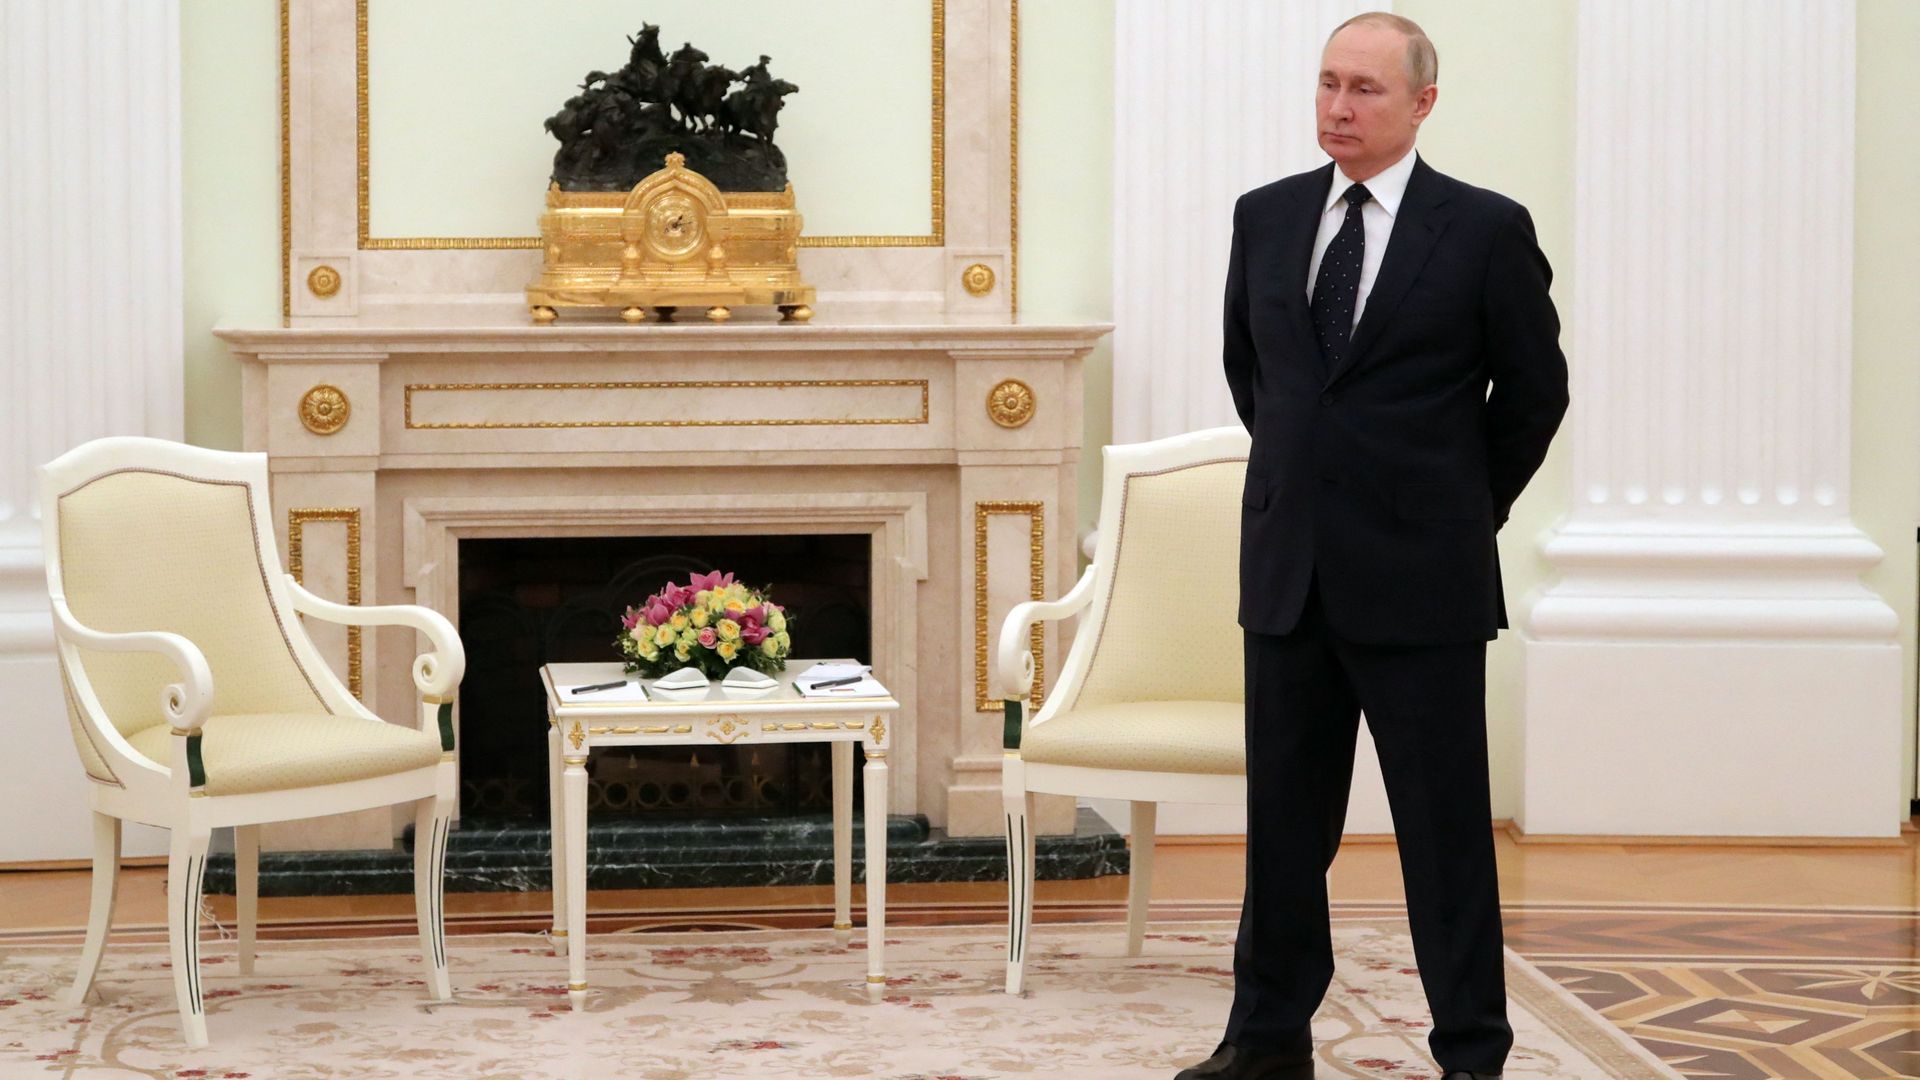 Russian President Vladimir Putin stands in a hall prior to a meeting with his Belarus' counterpart at the Kremlin in Moscow on March 11.